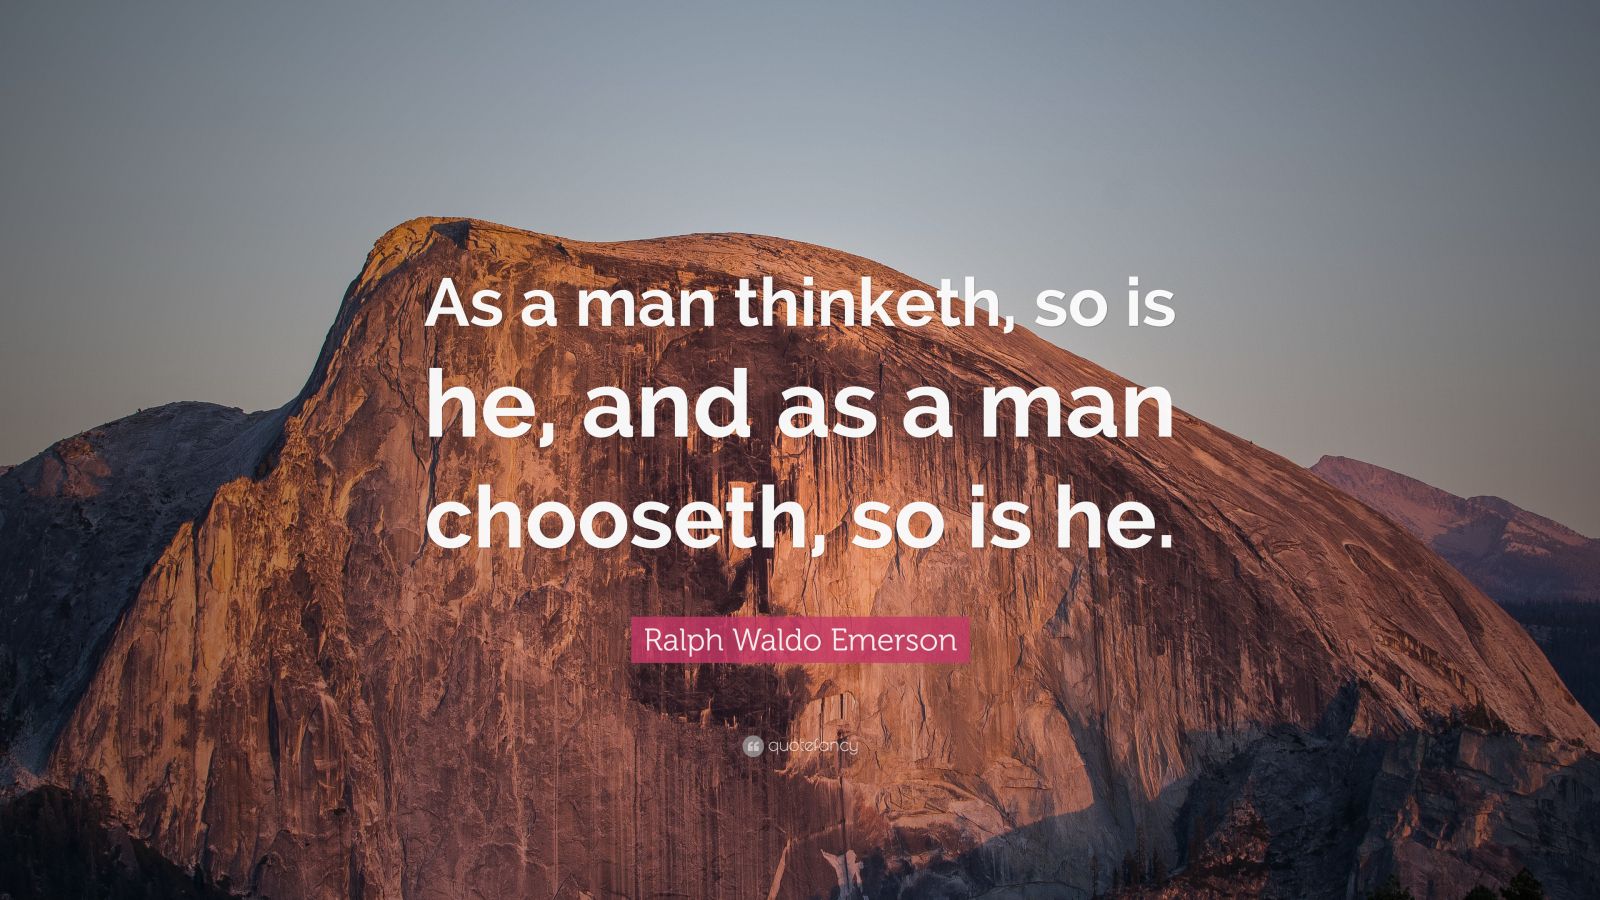 Ralph Waldo Emerson Quote: “As a man thinketh, so is he, and as a man